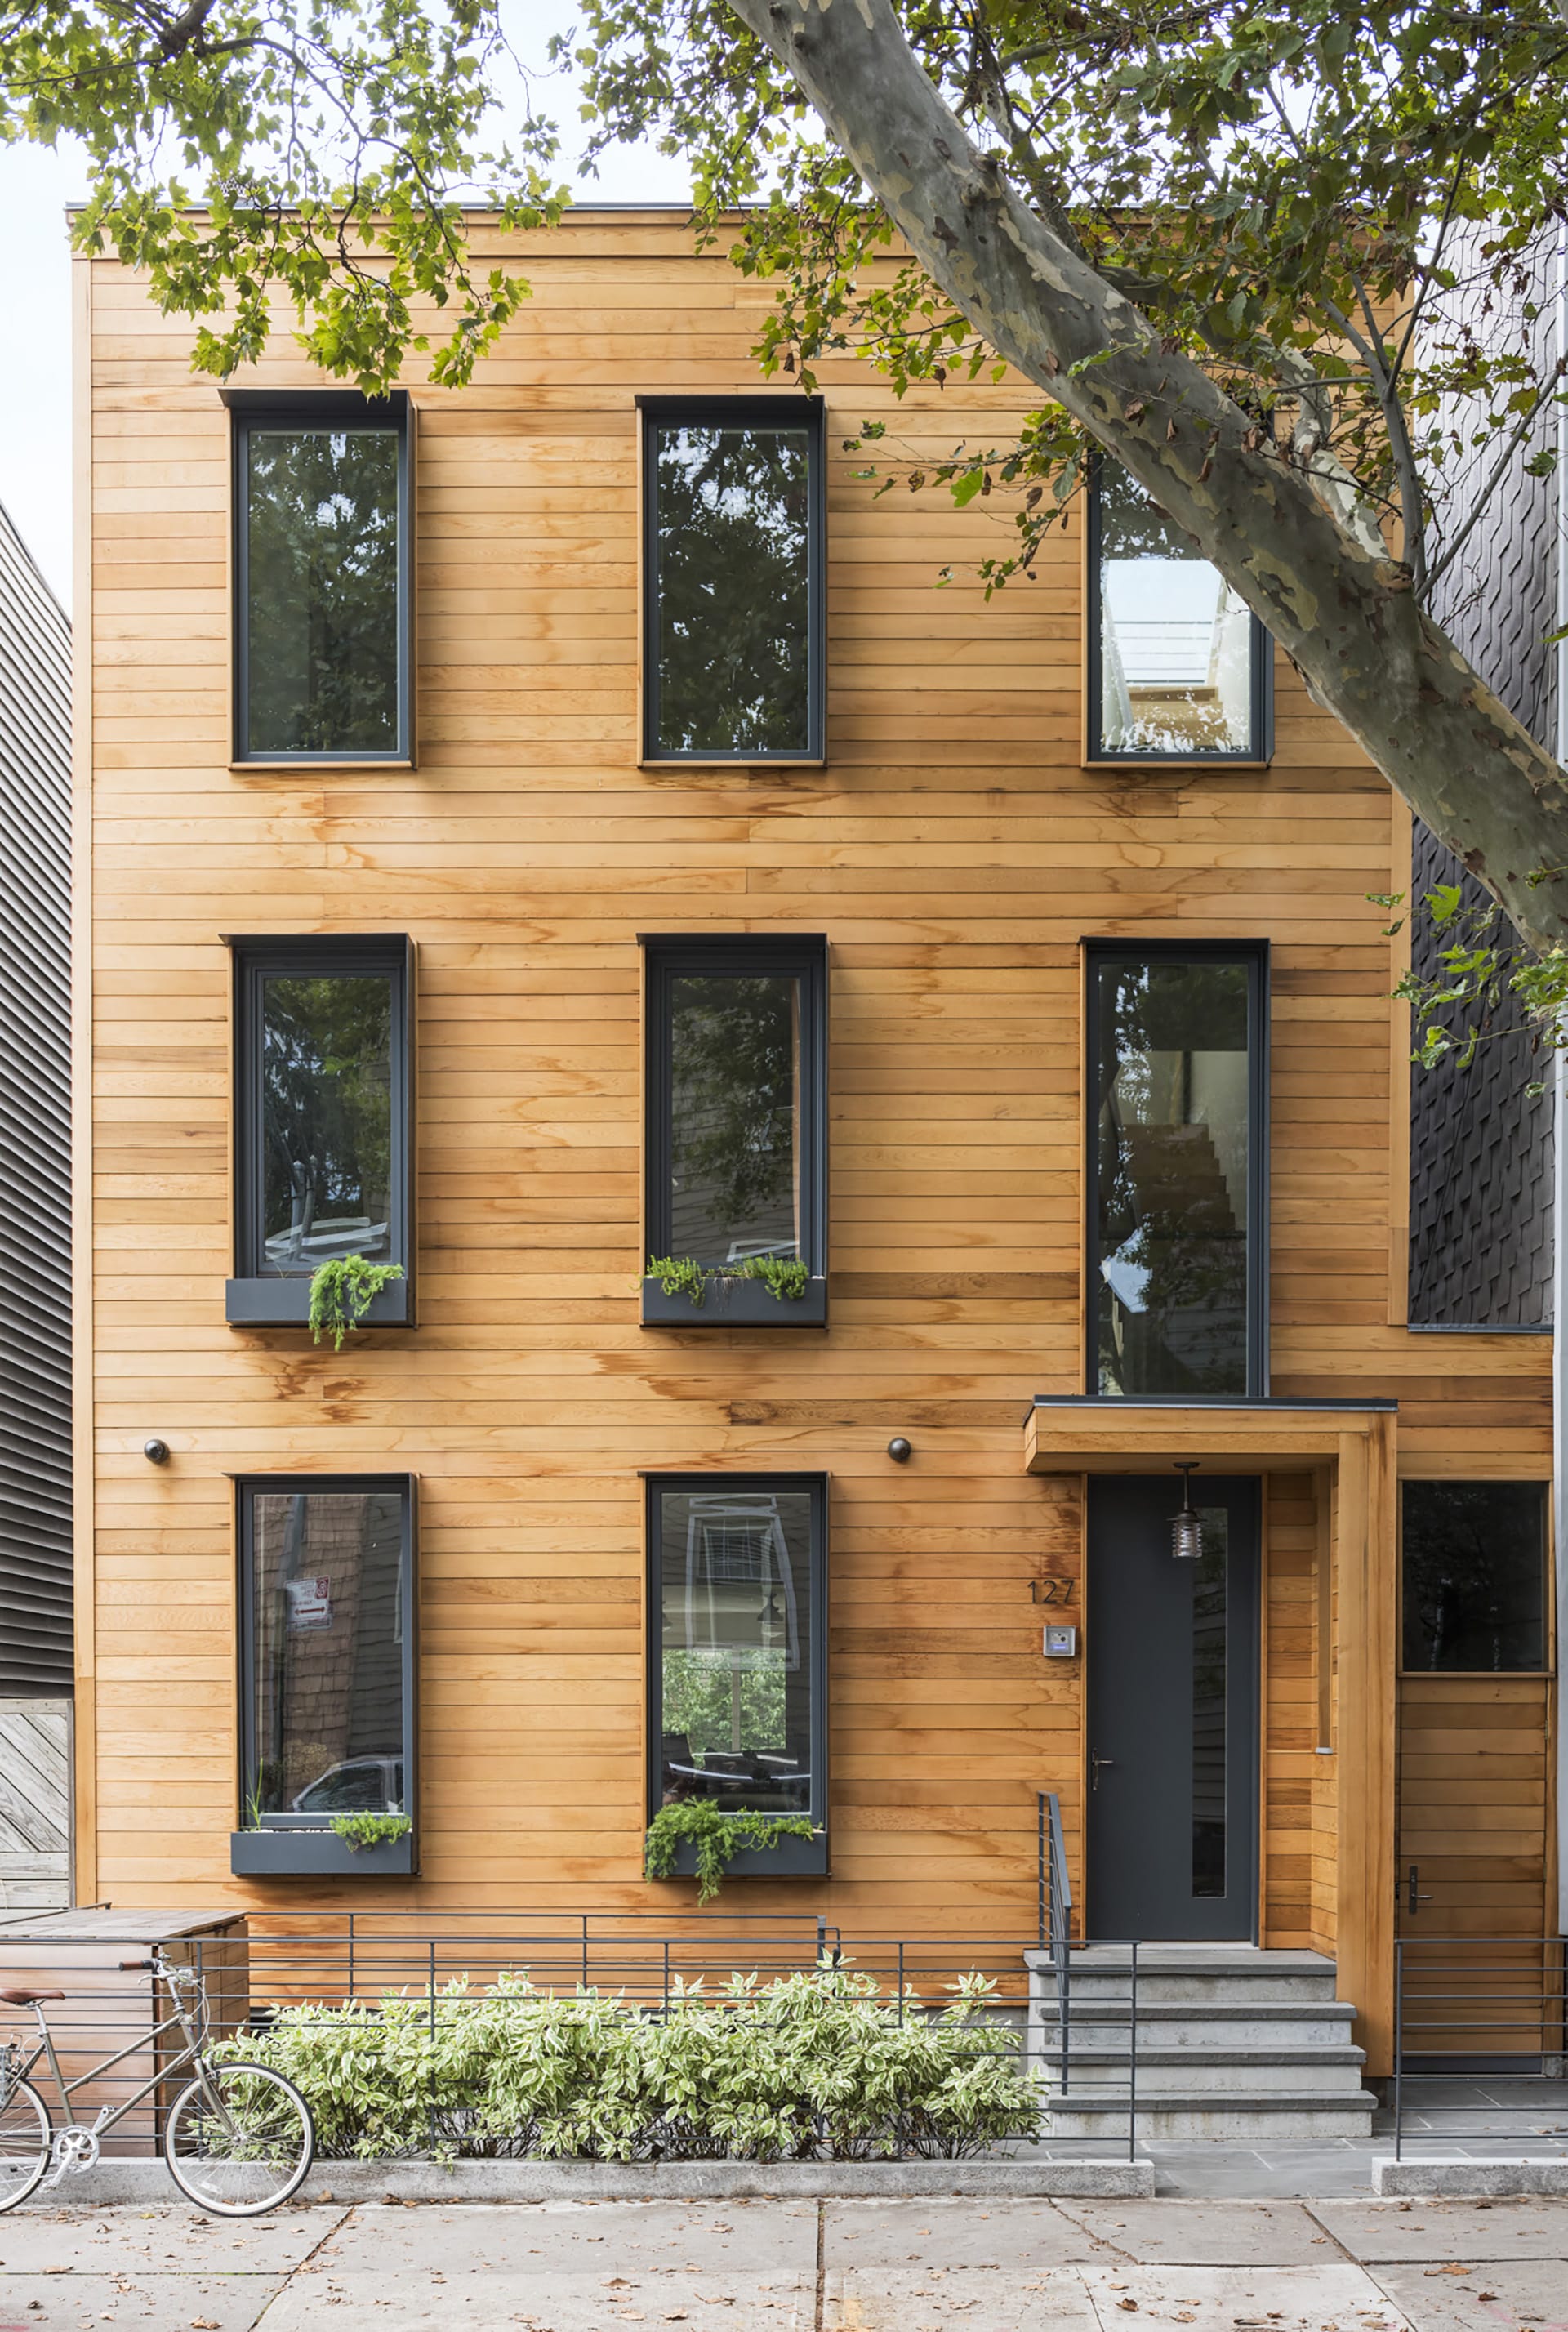 Exterior of a wood-framed Greenpoint townhouse with cedar siding, planters in front of the home and windows, and black window and door openings.